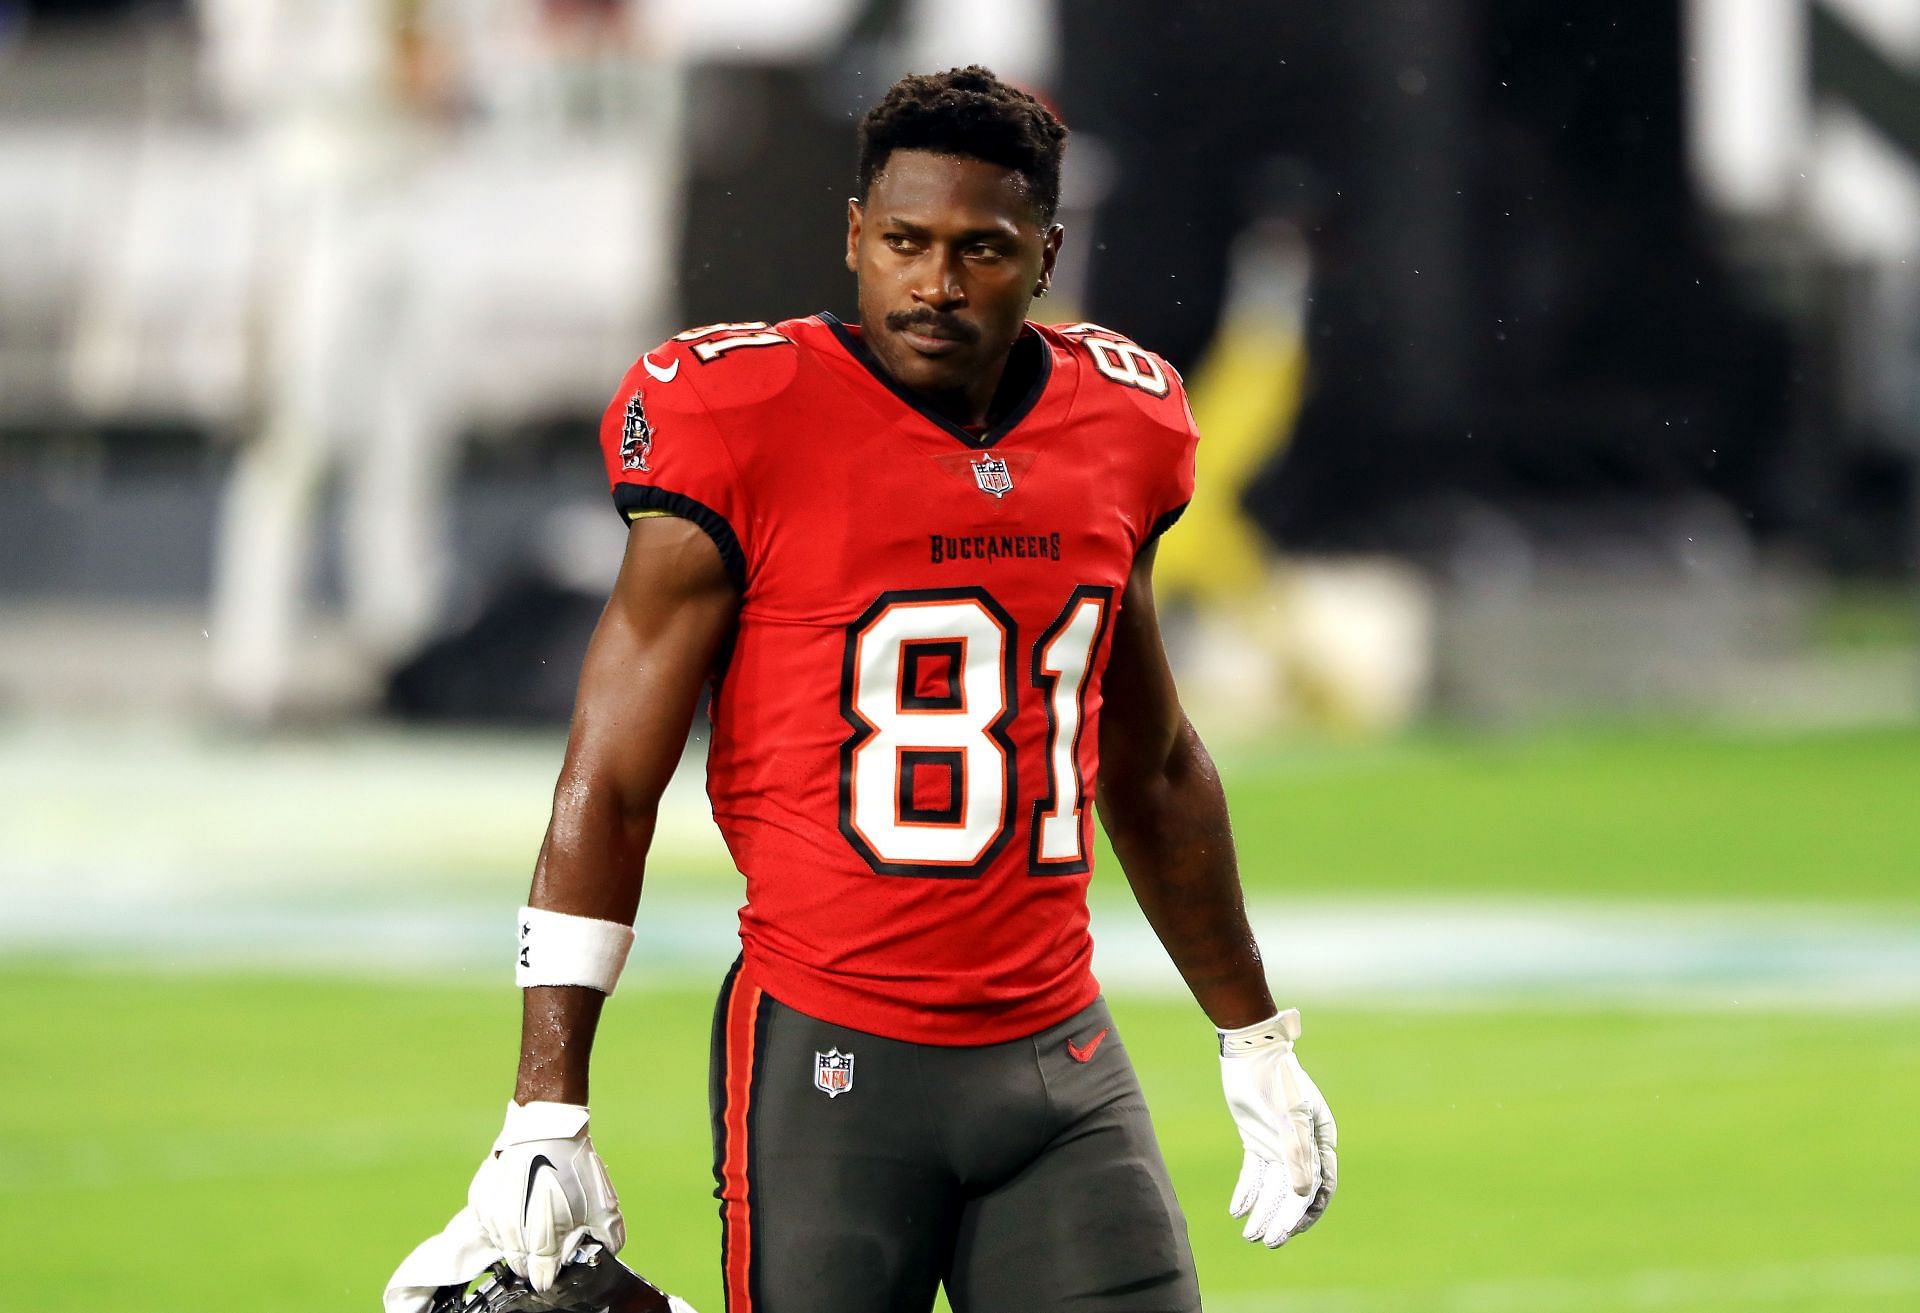 Antonio Brown in his Bucs uniform before the fallout